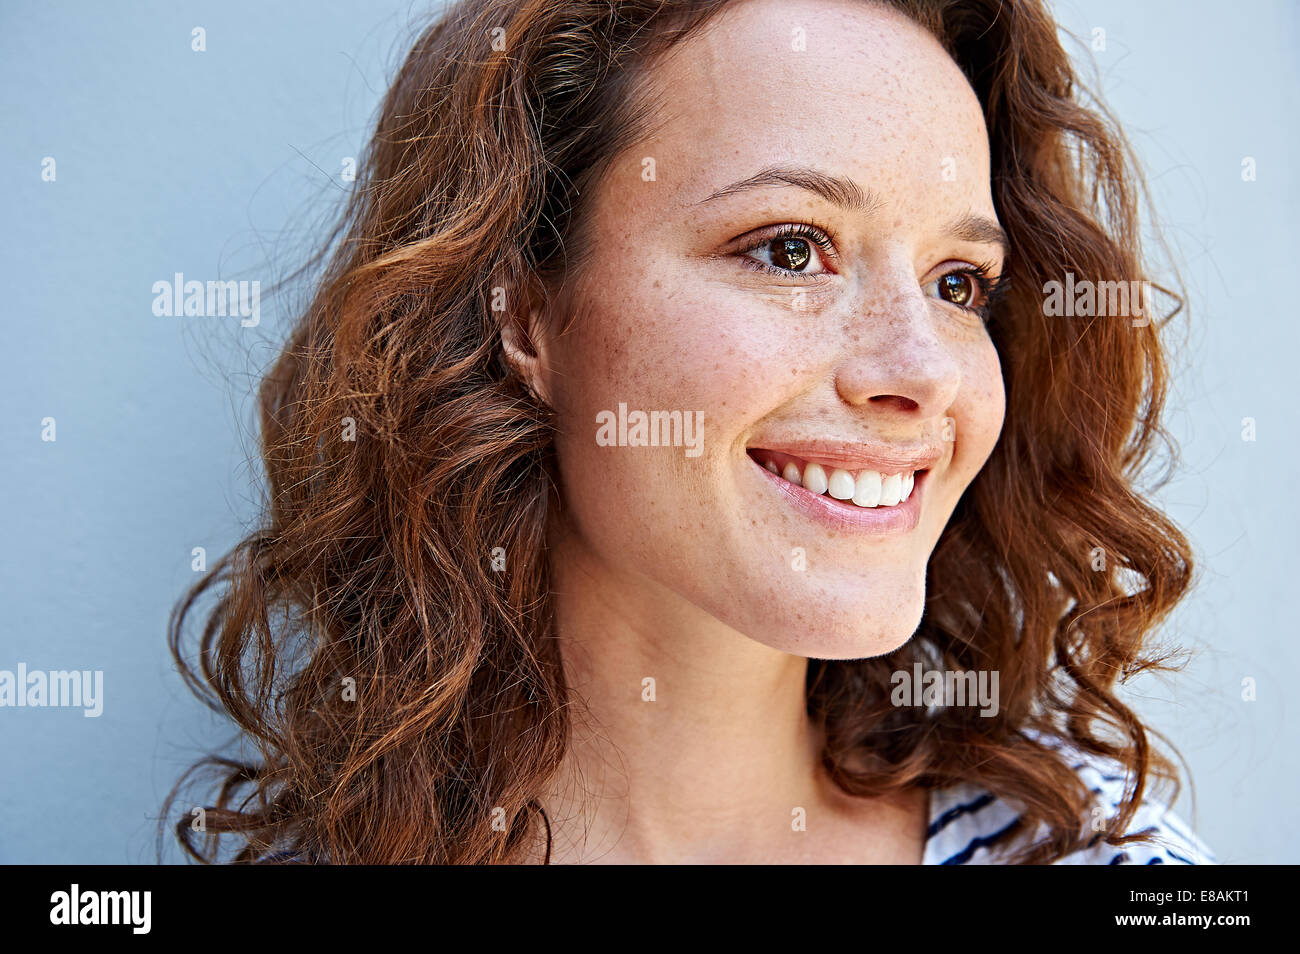 Close up of woman with freckles Stock Photo